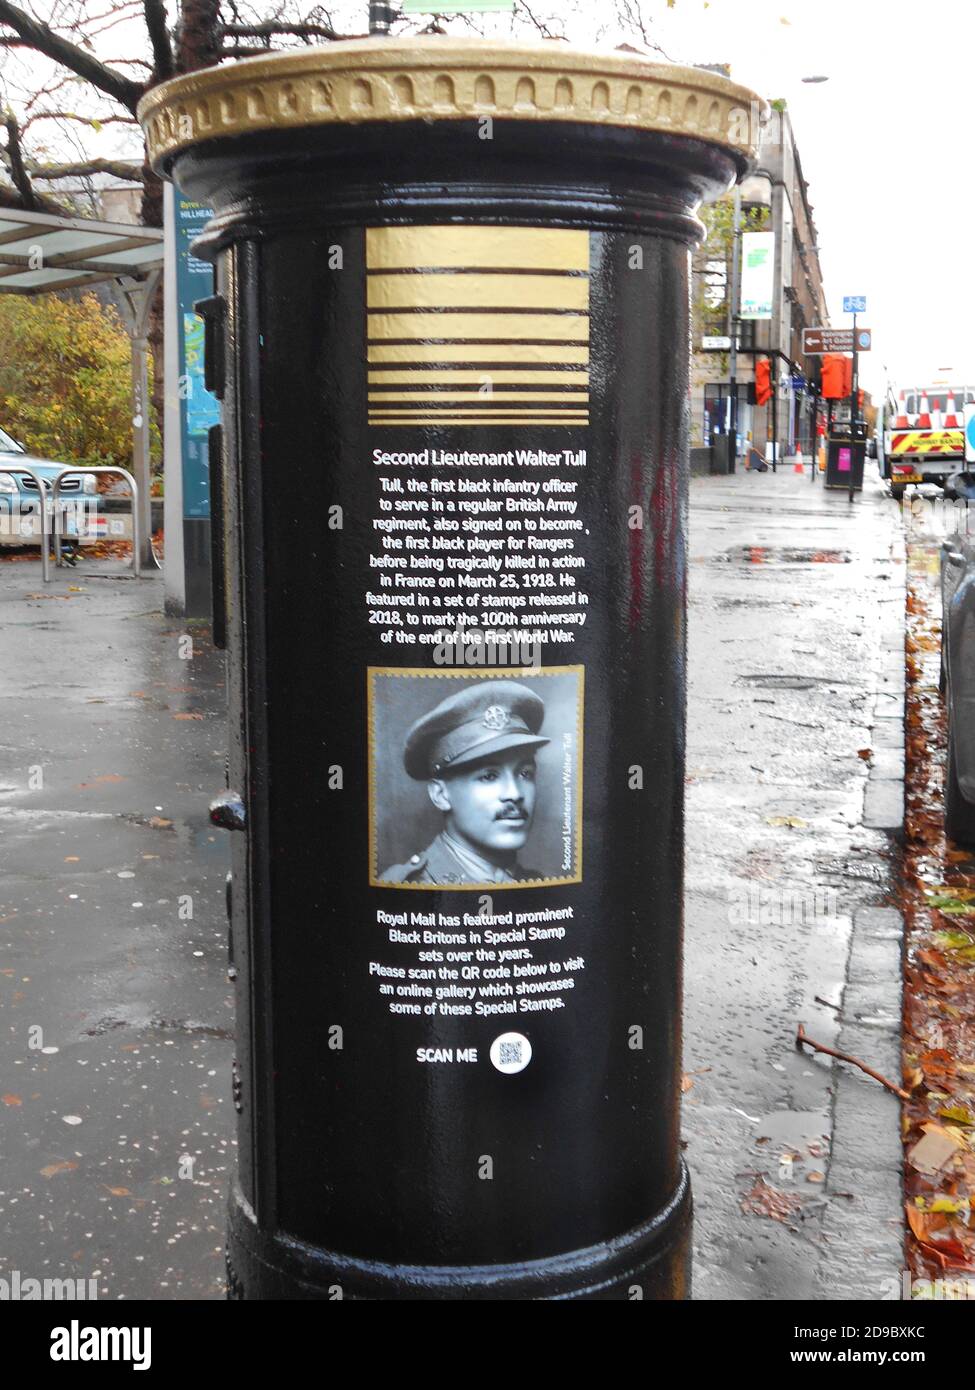 This Royal Mail post box, in Glasgow, has been painted black and gold to celebrate Black History month, October 2020. It is a tribute to Walter Tull, who was the 1st black officer in the regular British Army. He was also signed up to play for Rangers football team before being killed in action, in France, on the 25th March 1918. This is the inscription on the post box along with a picture of Walter Tull. ALAN WYLIE/ALAMY© Stock Photo